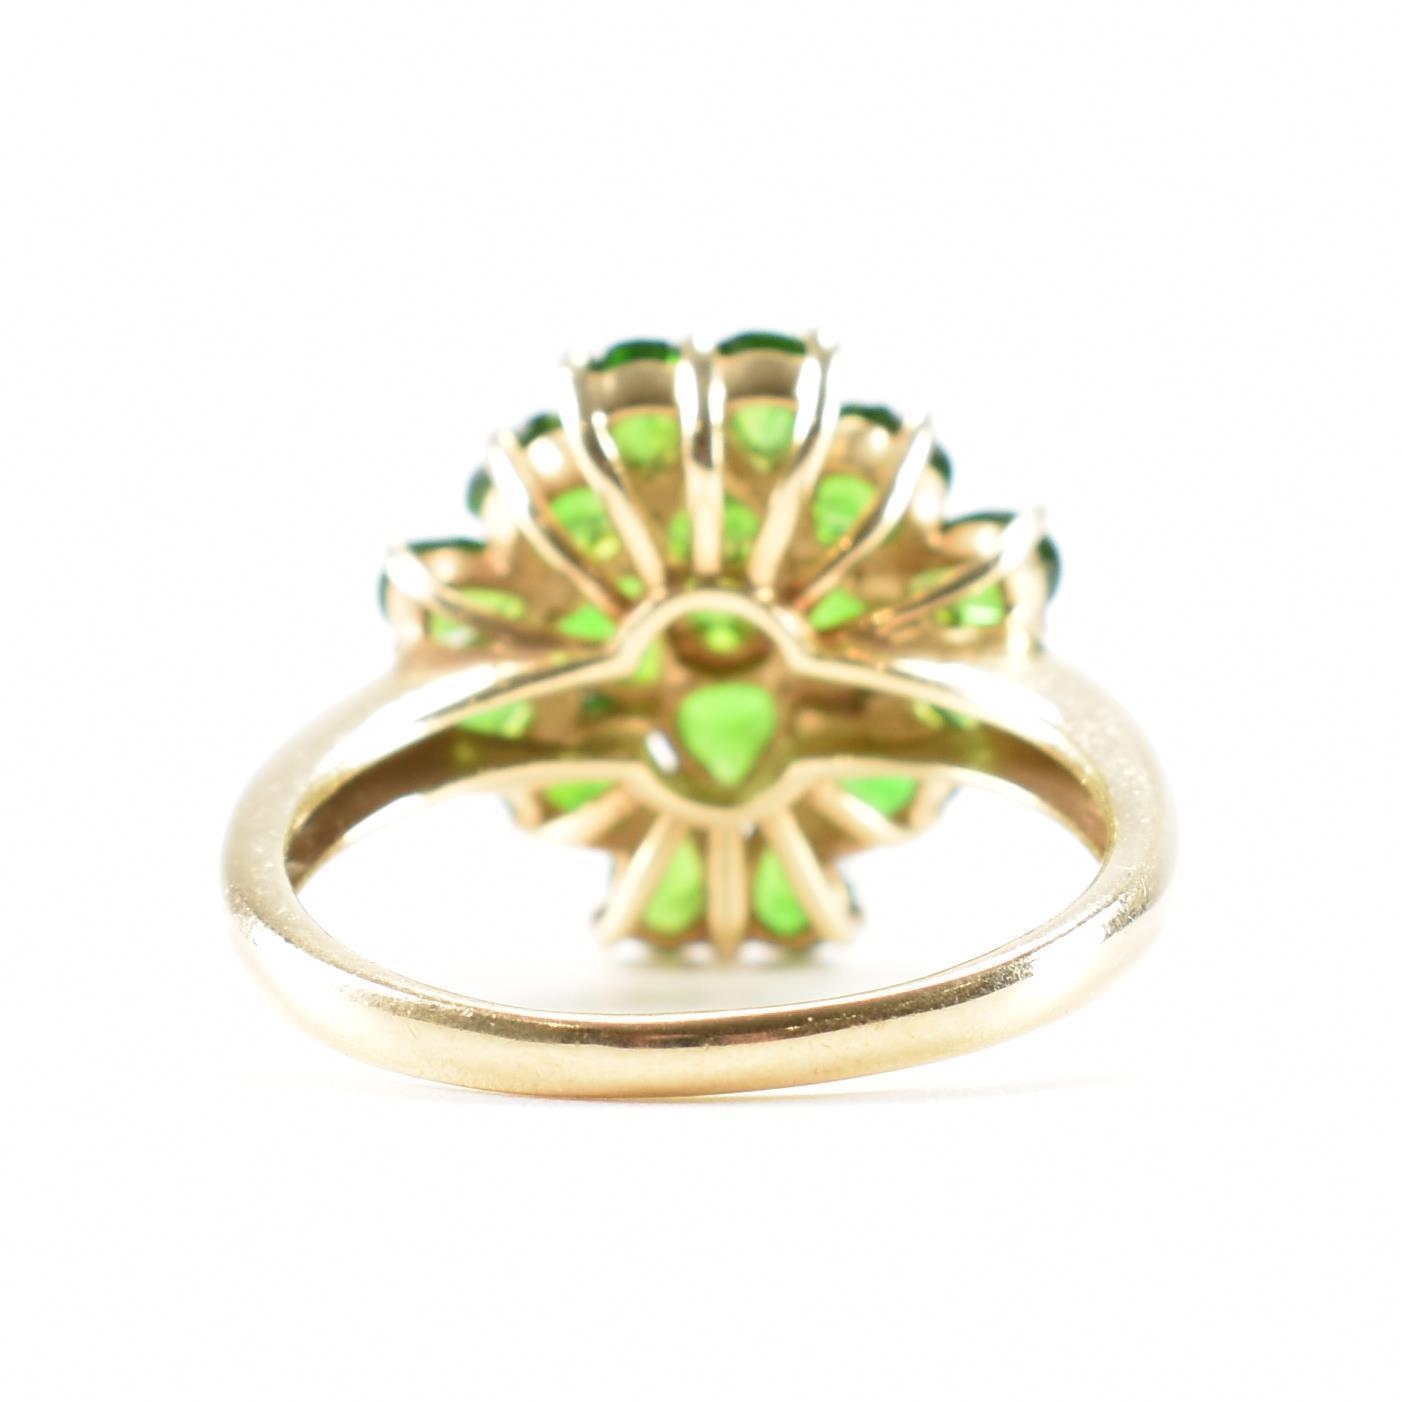 HALLMARKED 9CT GOLD & GREEN STONE CLUSTER RING - Image 3 of 11